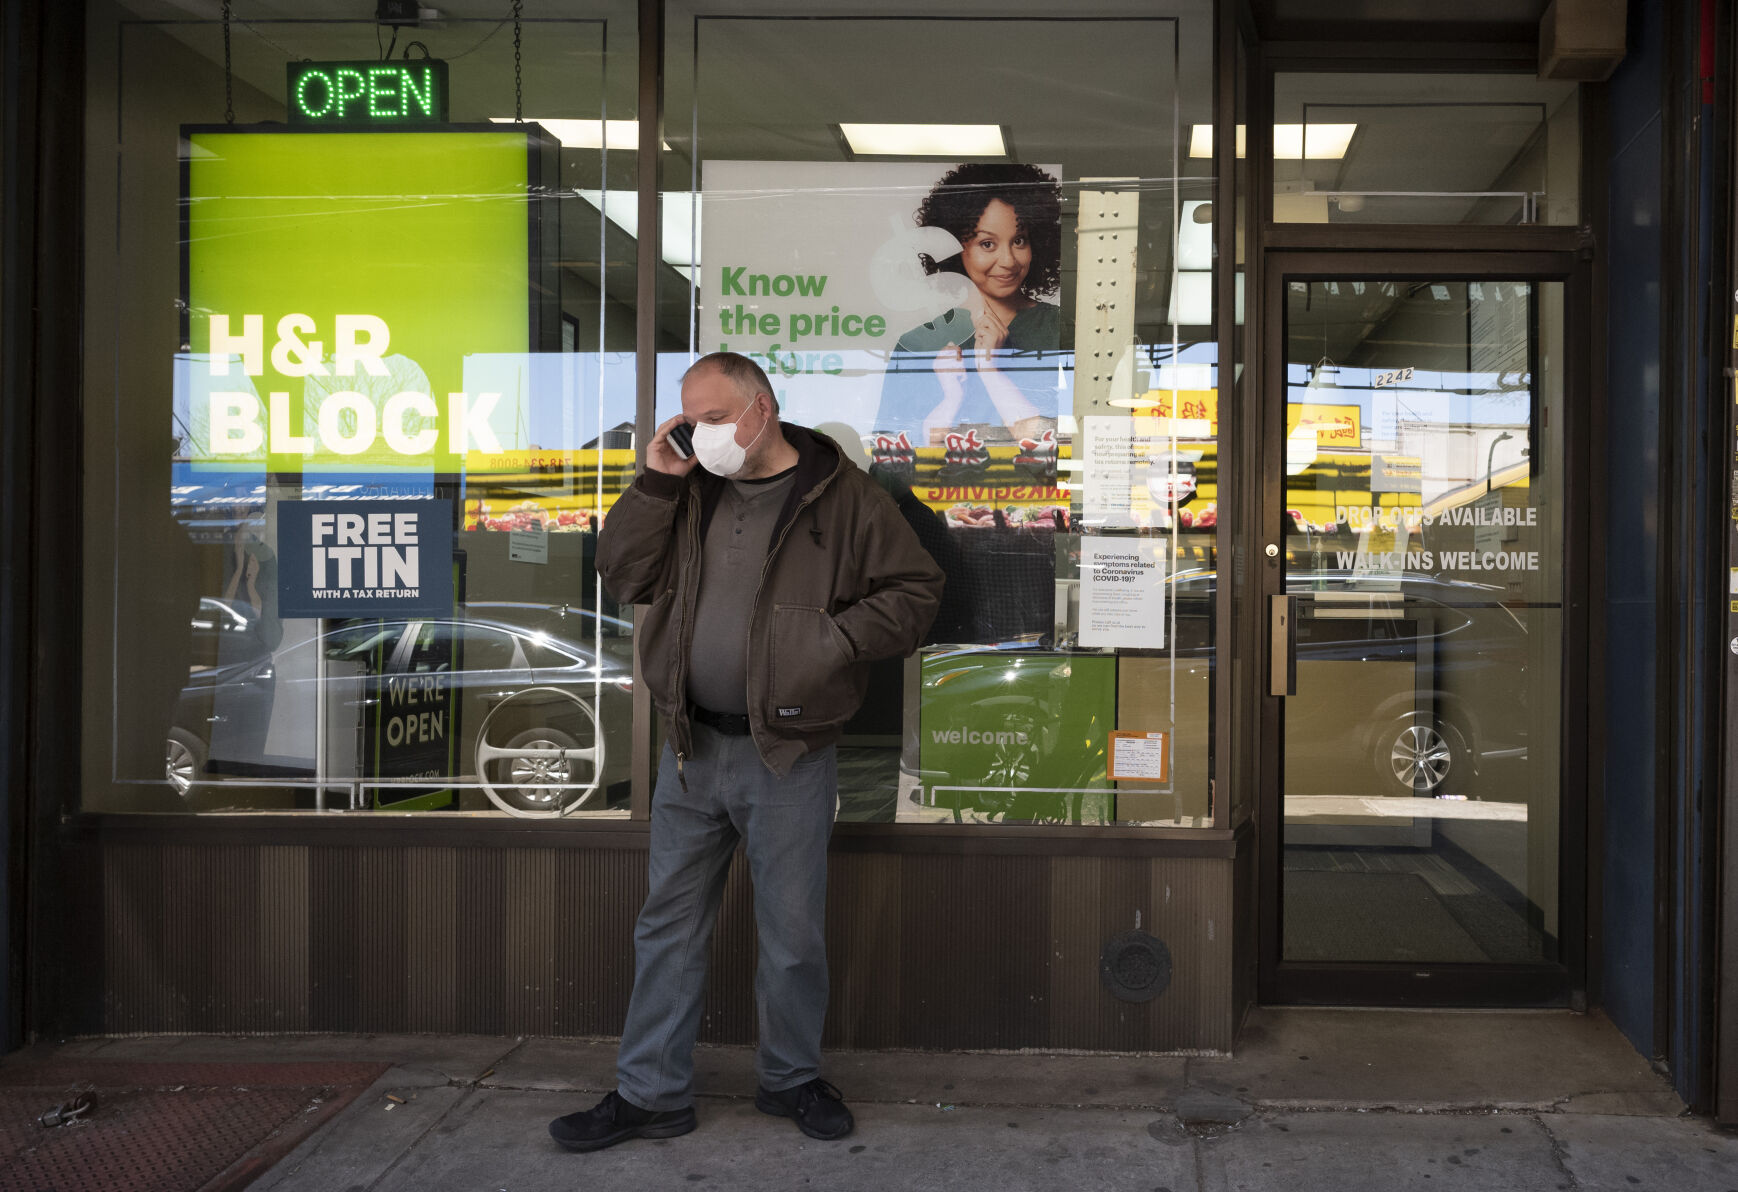 <p>FILE - A man waits outside a H&R Block tax preparation office on Monday, April 6, 2020, in the Brooklyn borough of New York. Tax season is here again. Whether you do your taxes by yourself, go to a tax clinic or hire a professional, navigating the tax system can be complicated. (AP Photo/Mark Lennihan, File)</p>   PHOTO CREDIT: Mark Lennihan 